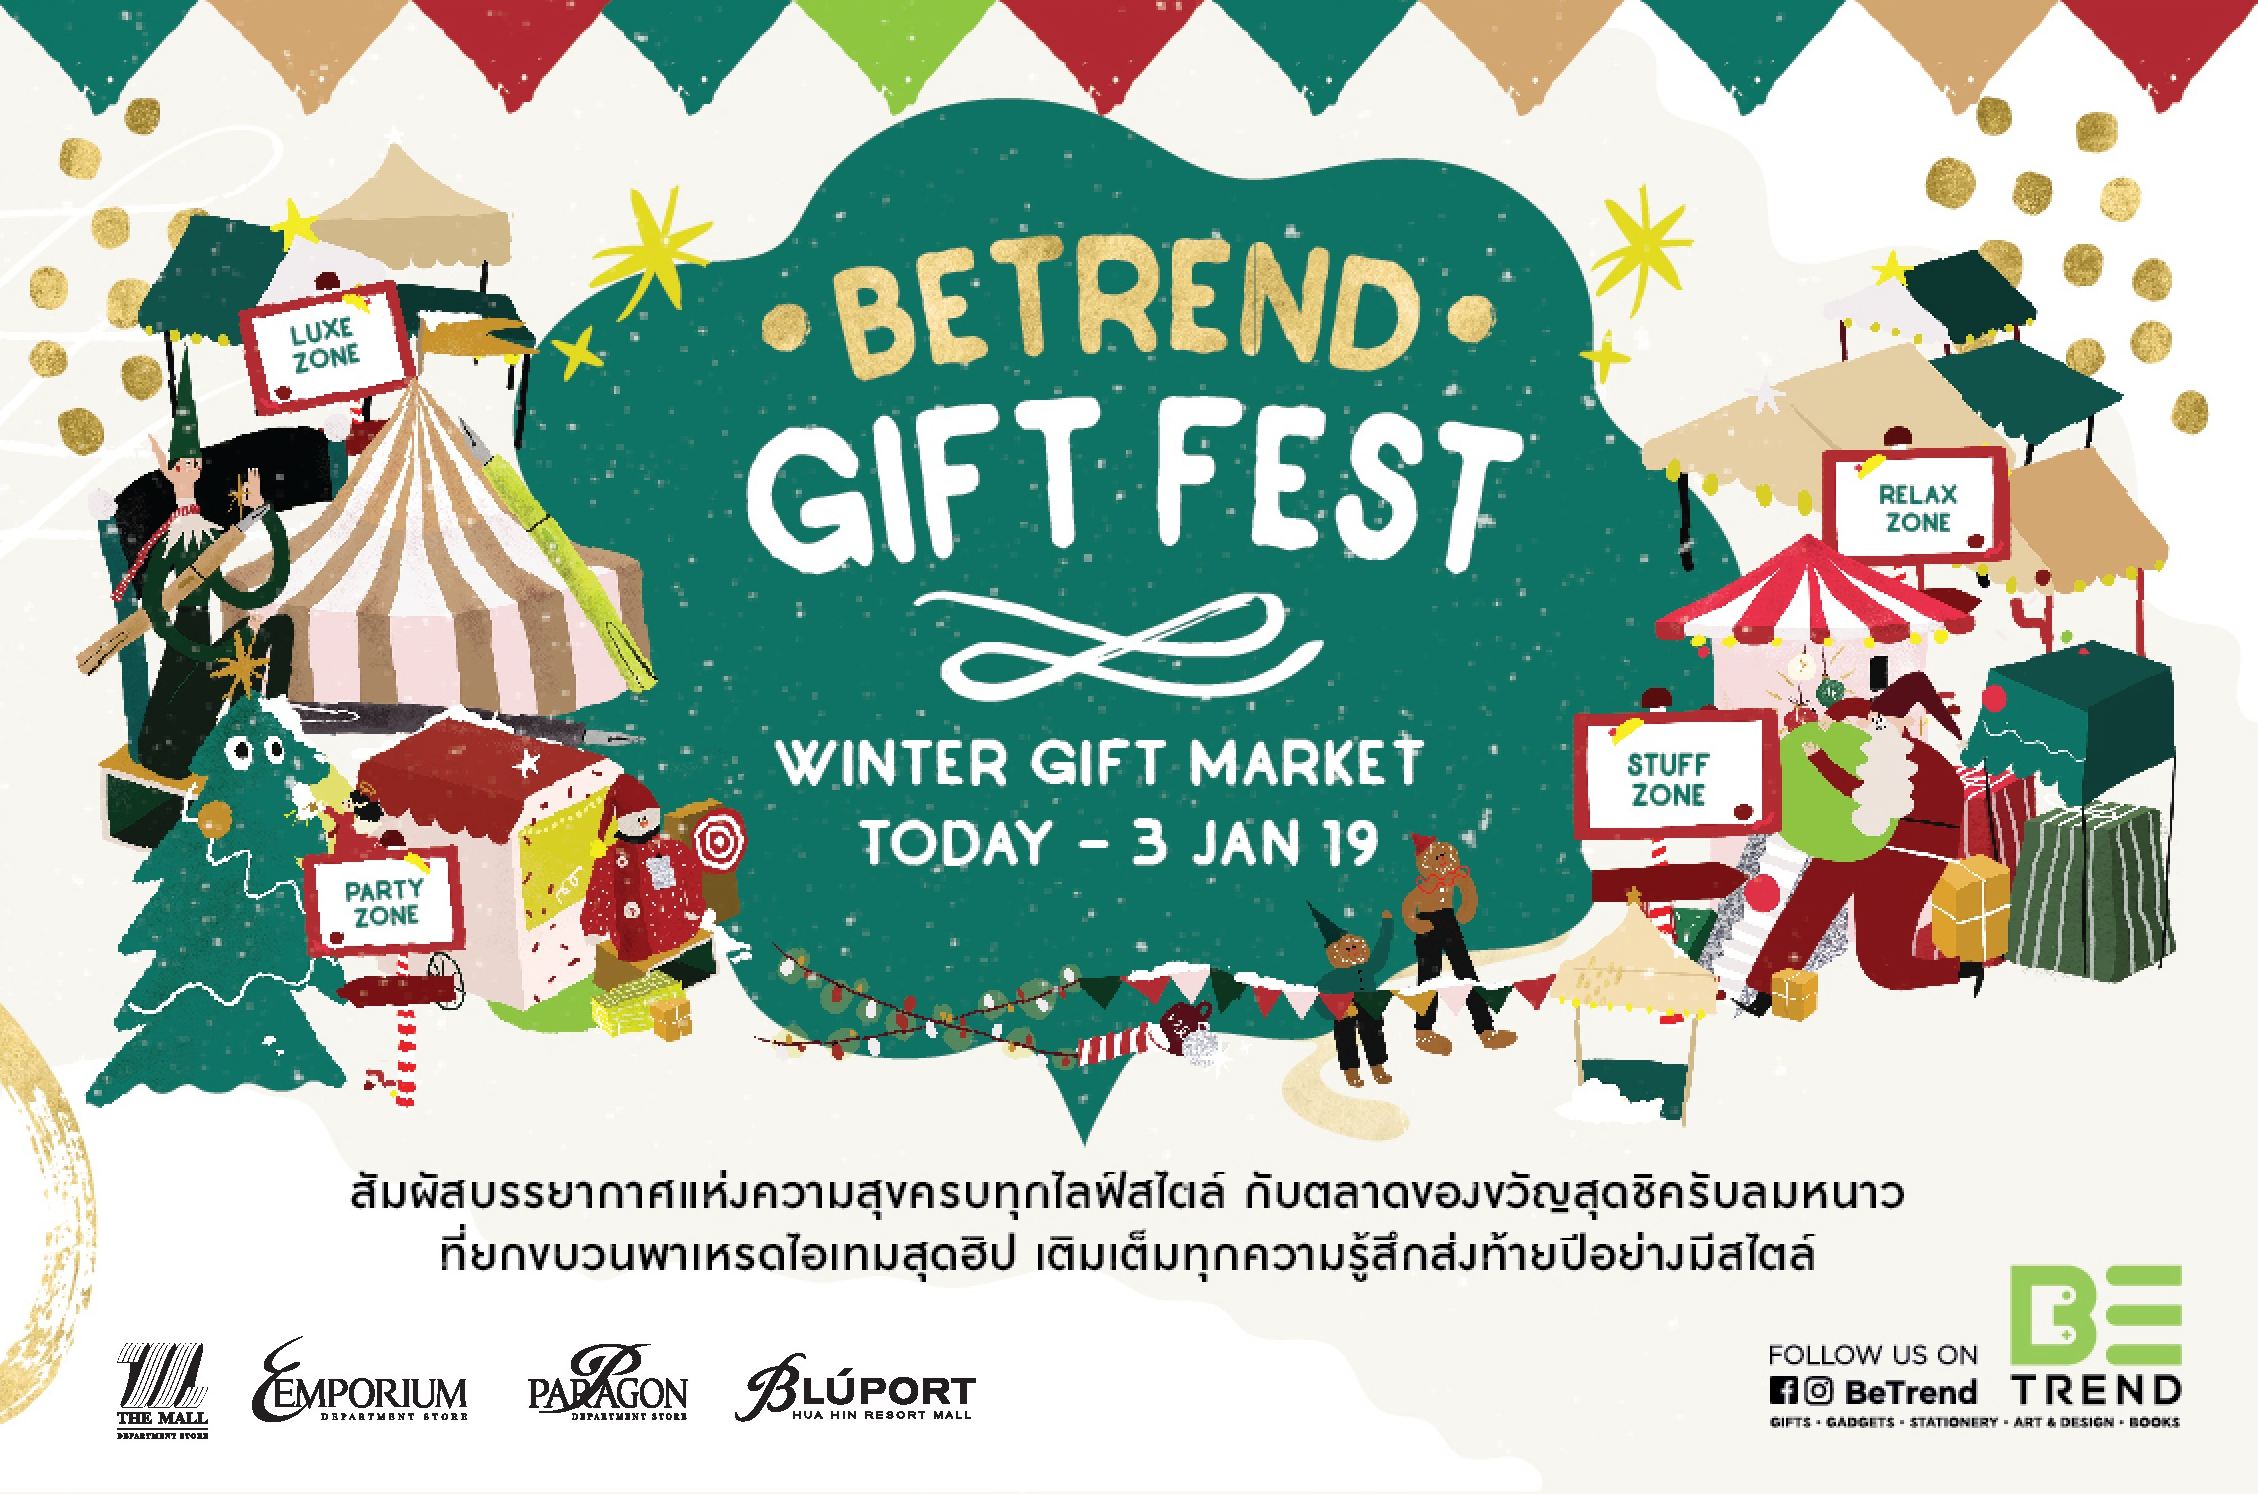 BETREND GIFT FEST 2019